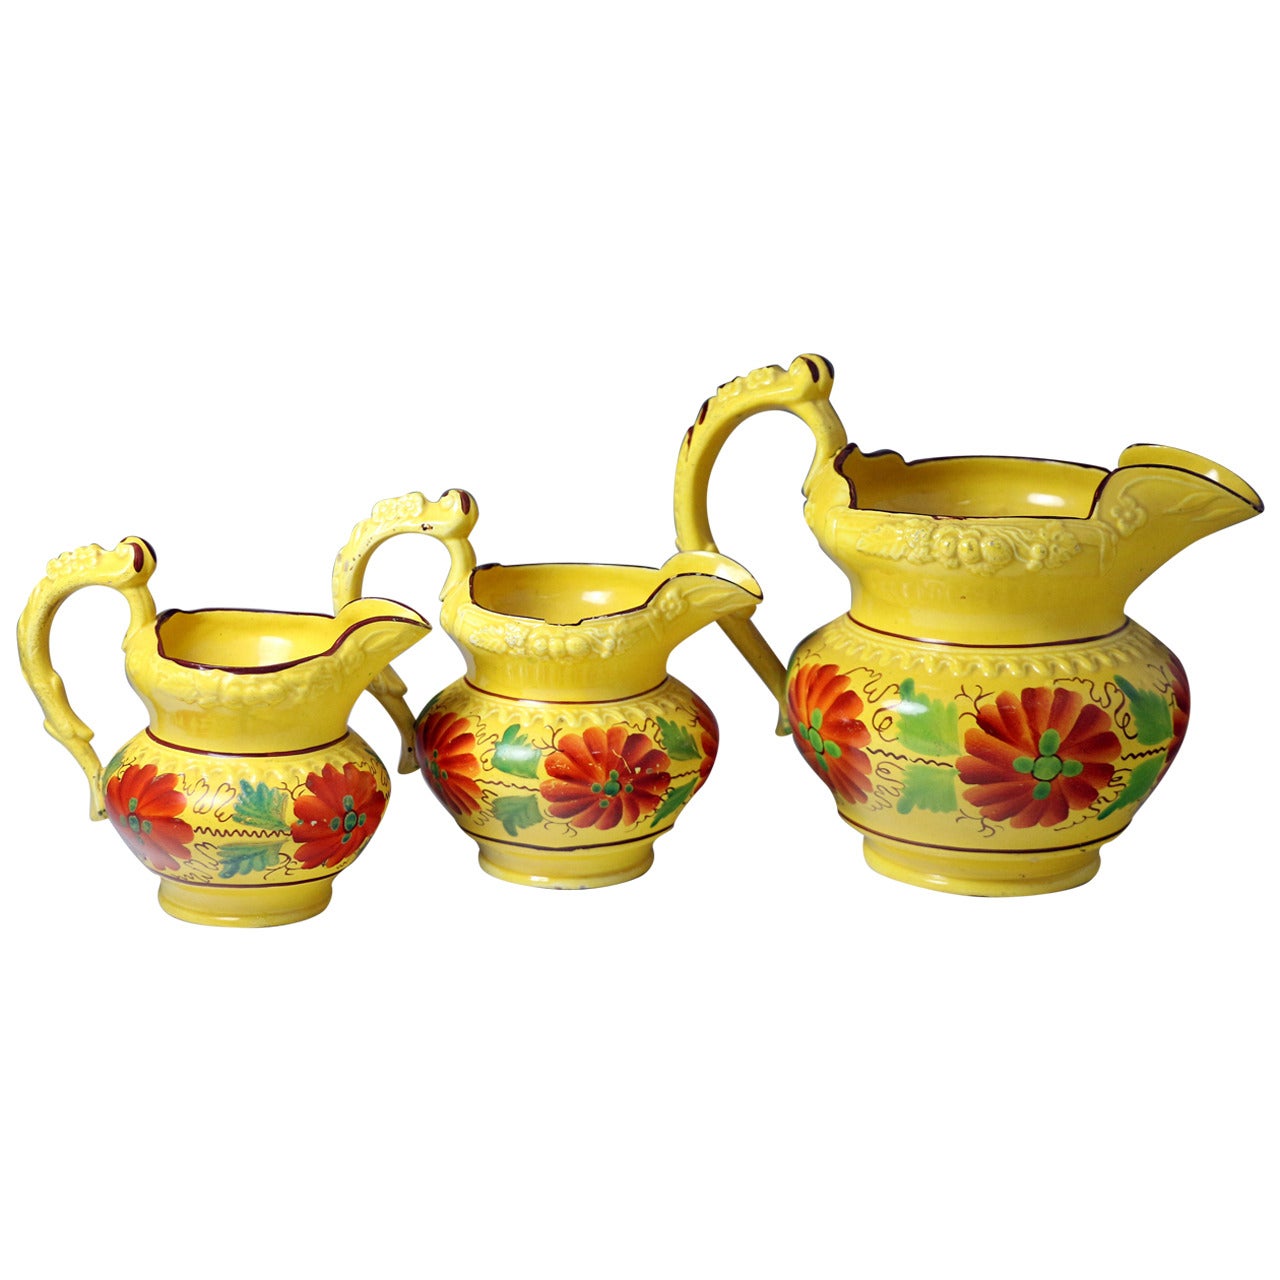 Set of Three Antique Staffordshire Pottery Canary-Yellow Pitchers